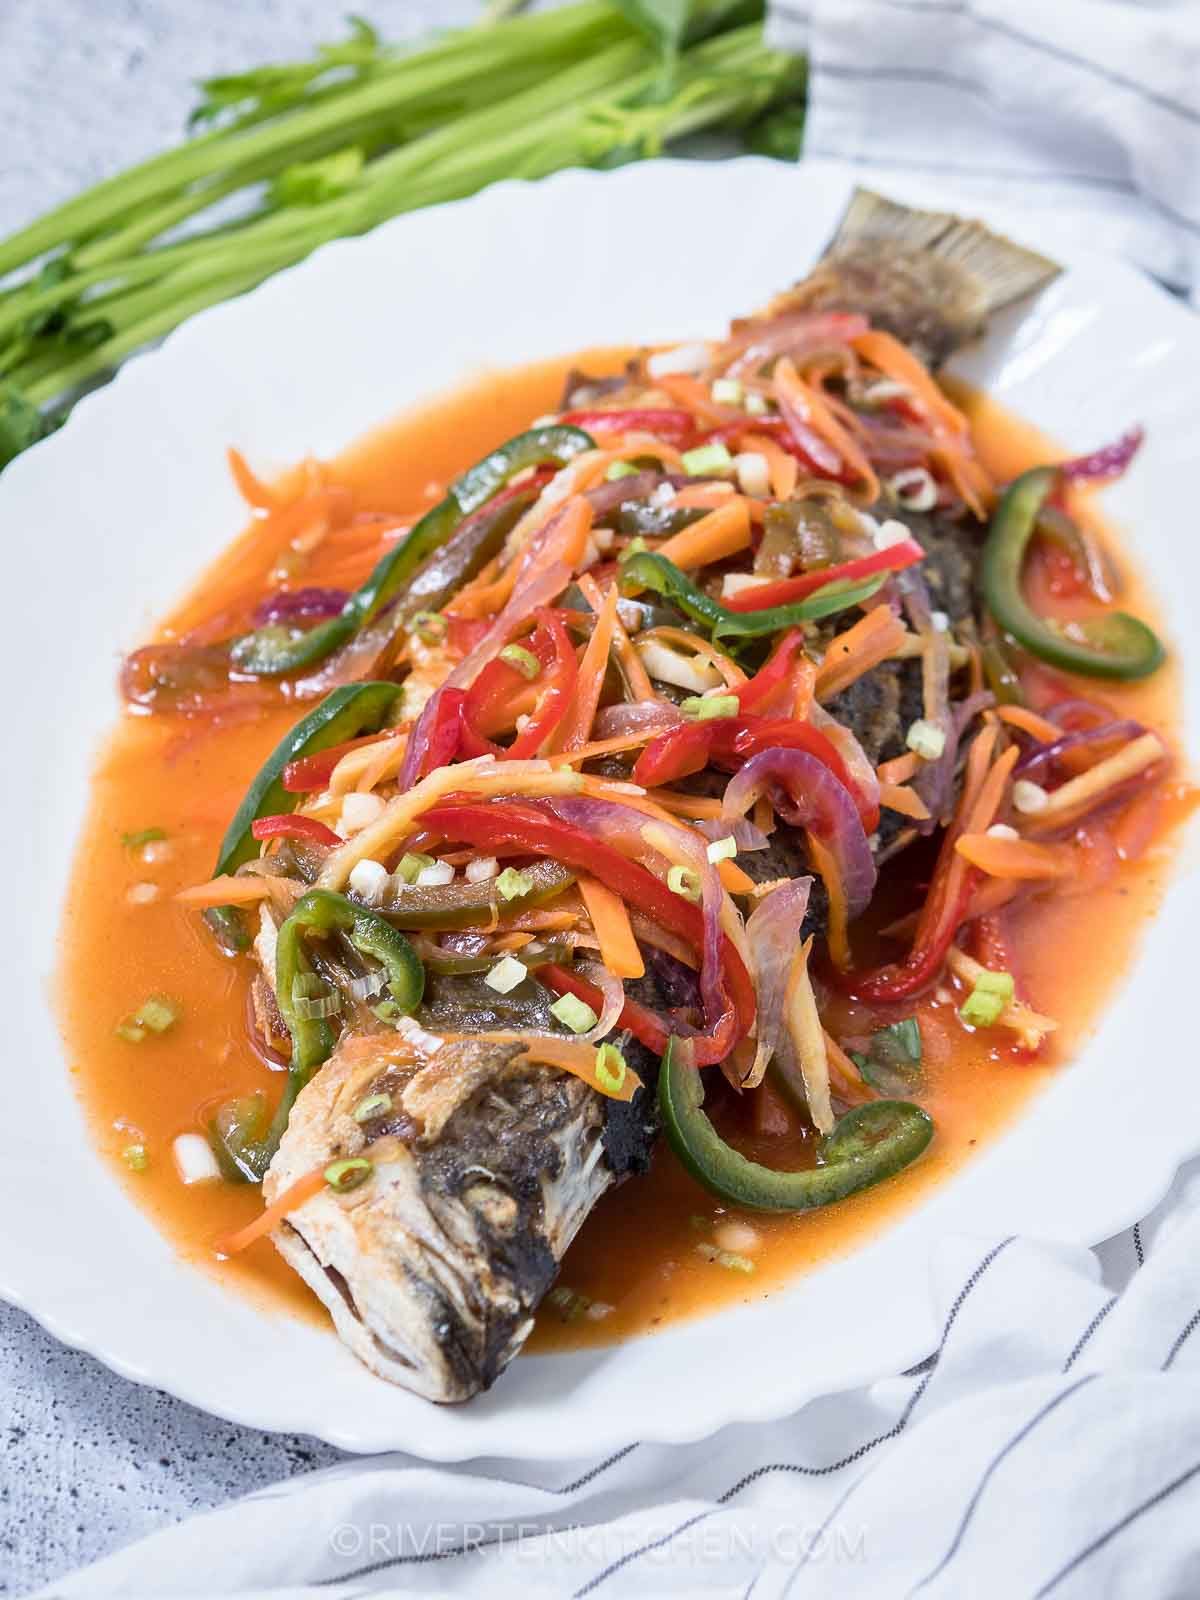 Sweet and Sour Whole Fish